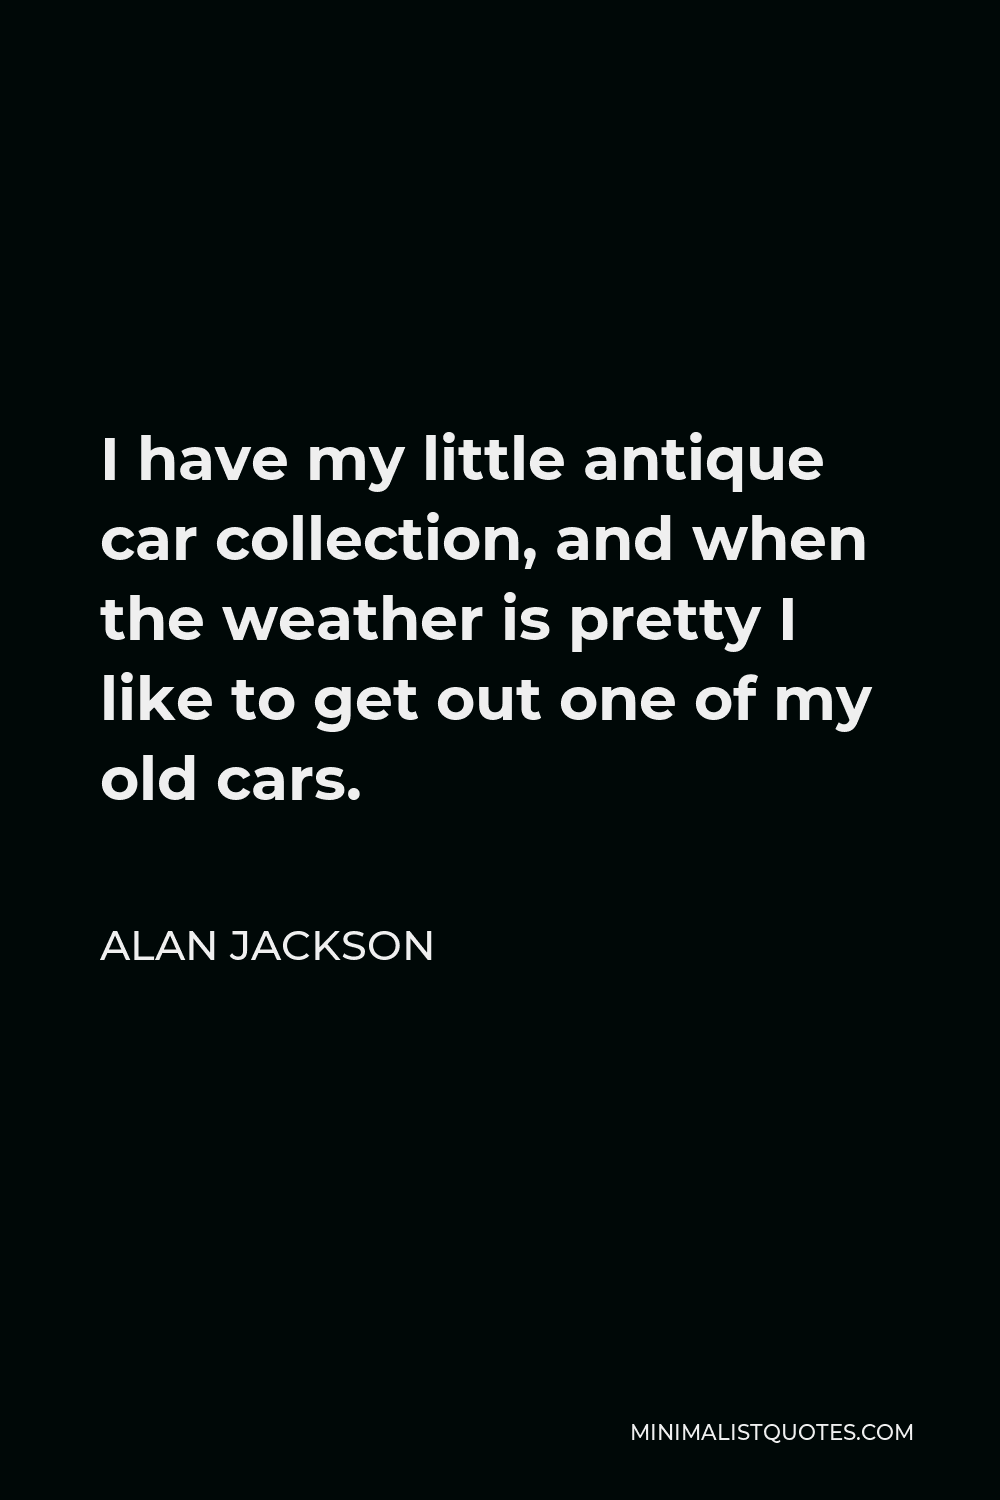 Alan Jackson Quote - I have my little antique car collection, and when the weather is pretty I like to get out one of my old cars.